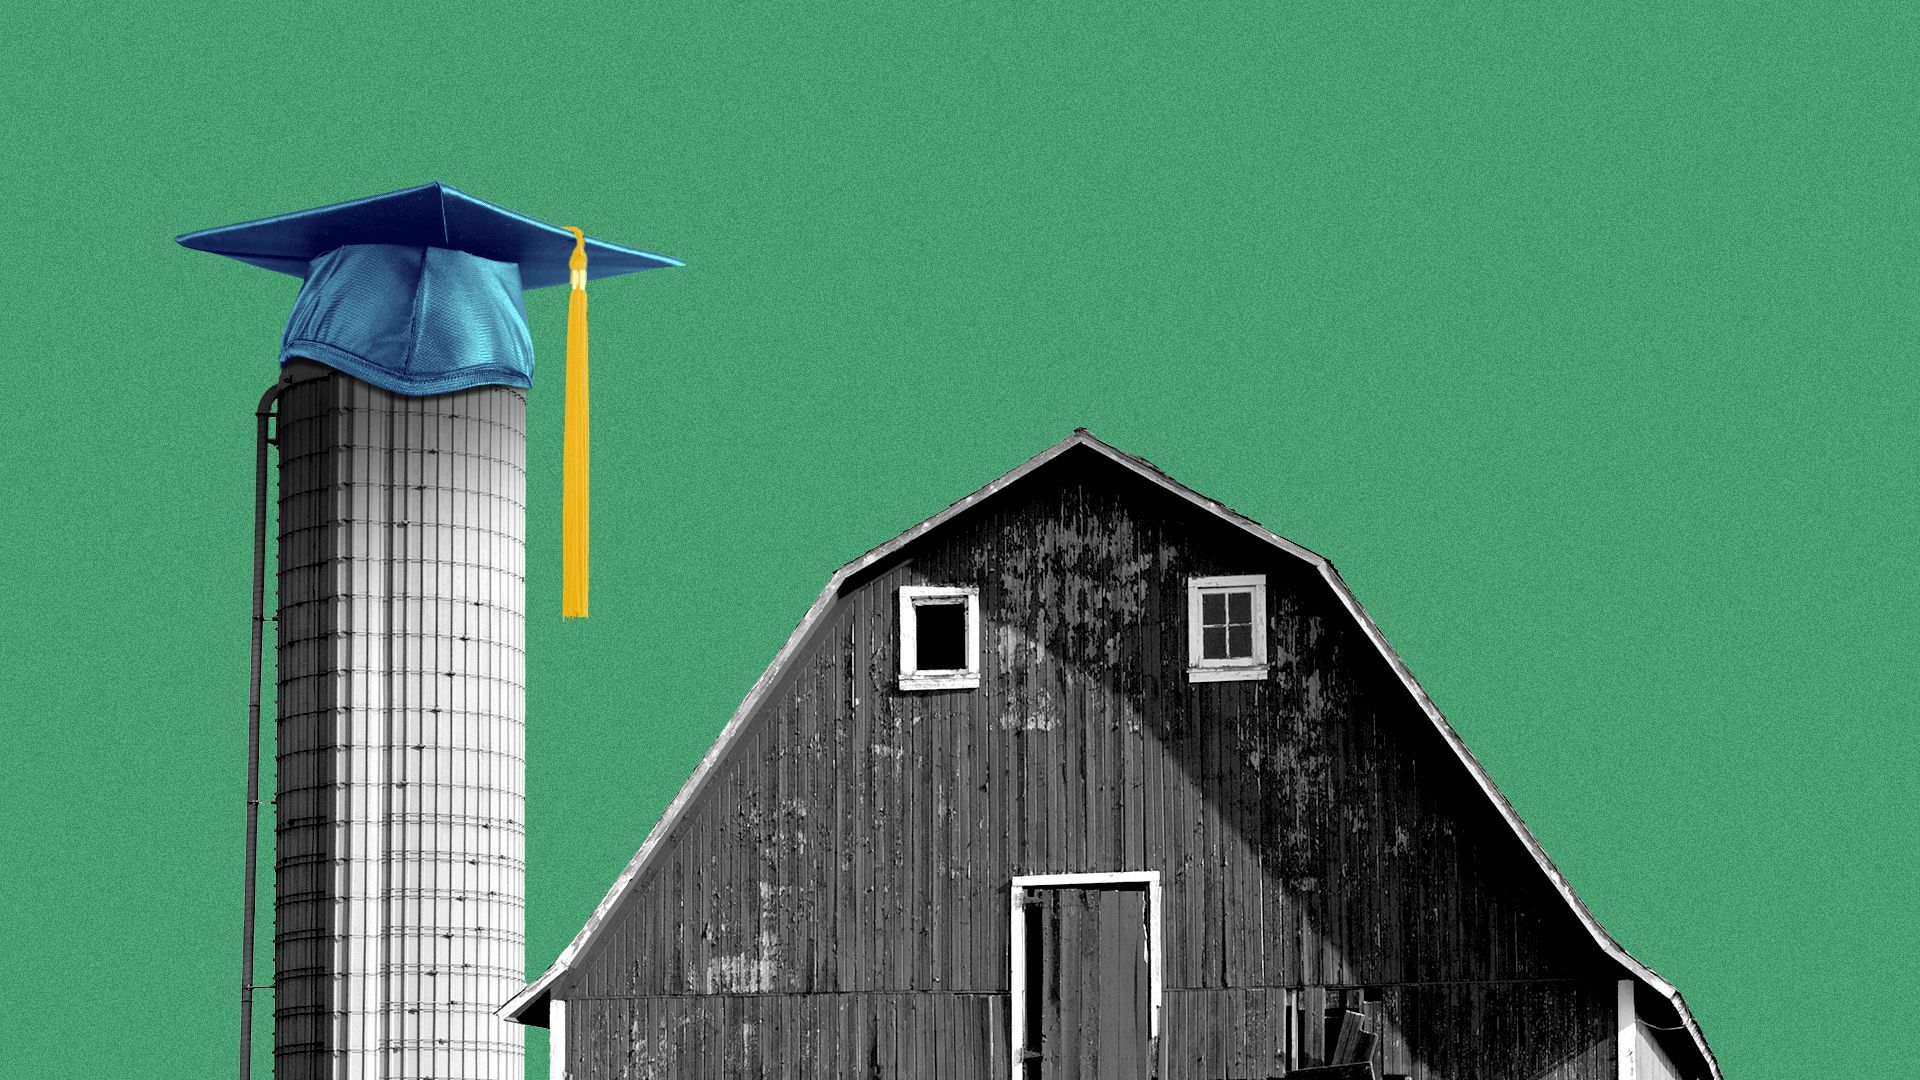 Illustration of a barn and a silo wearing a mortarboard.